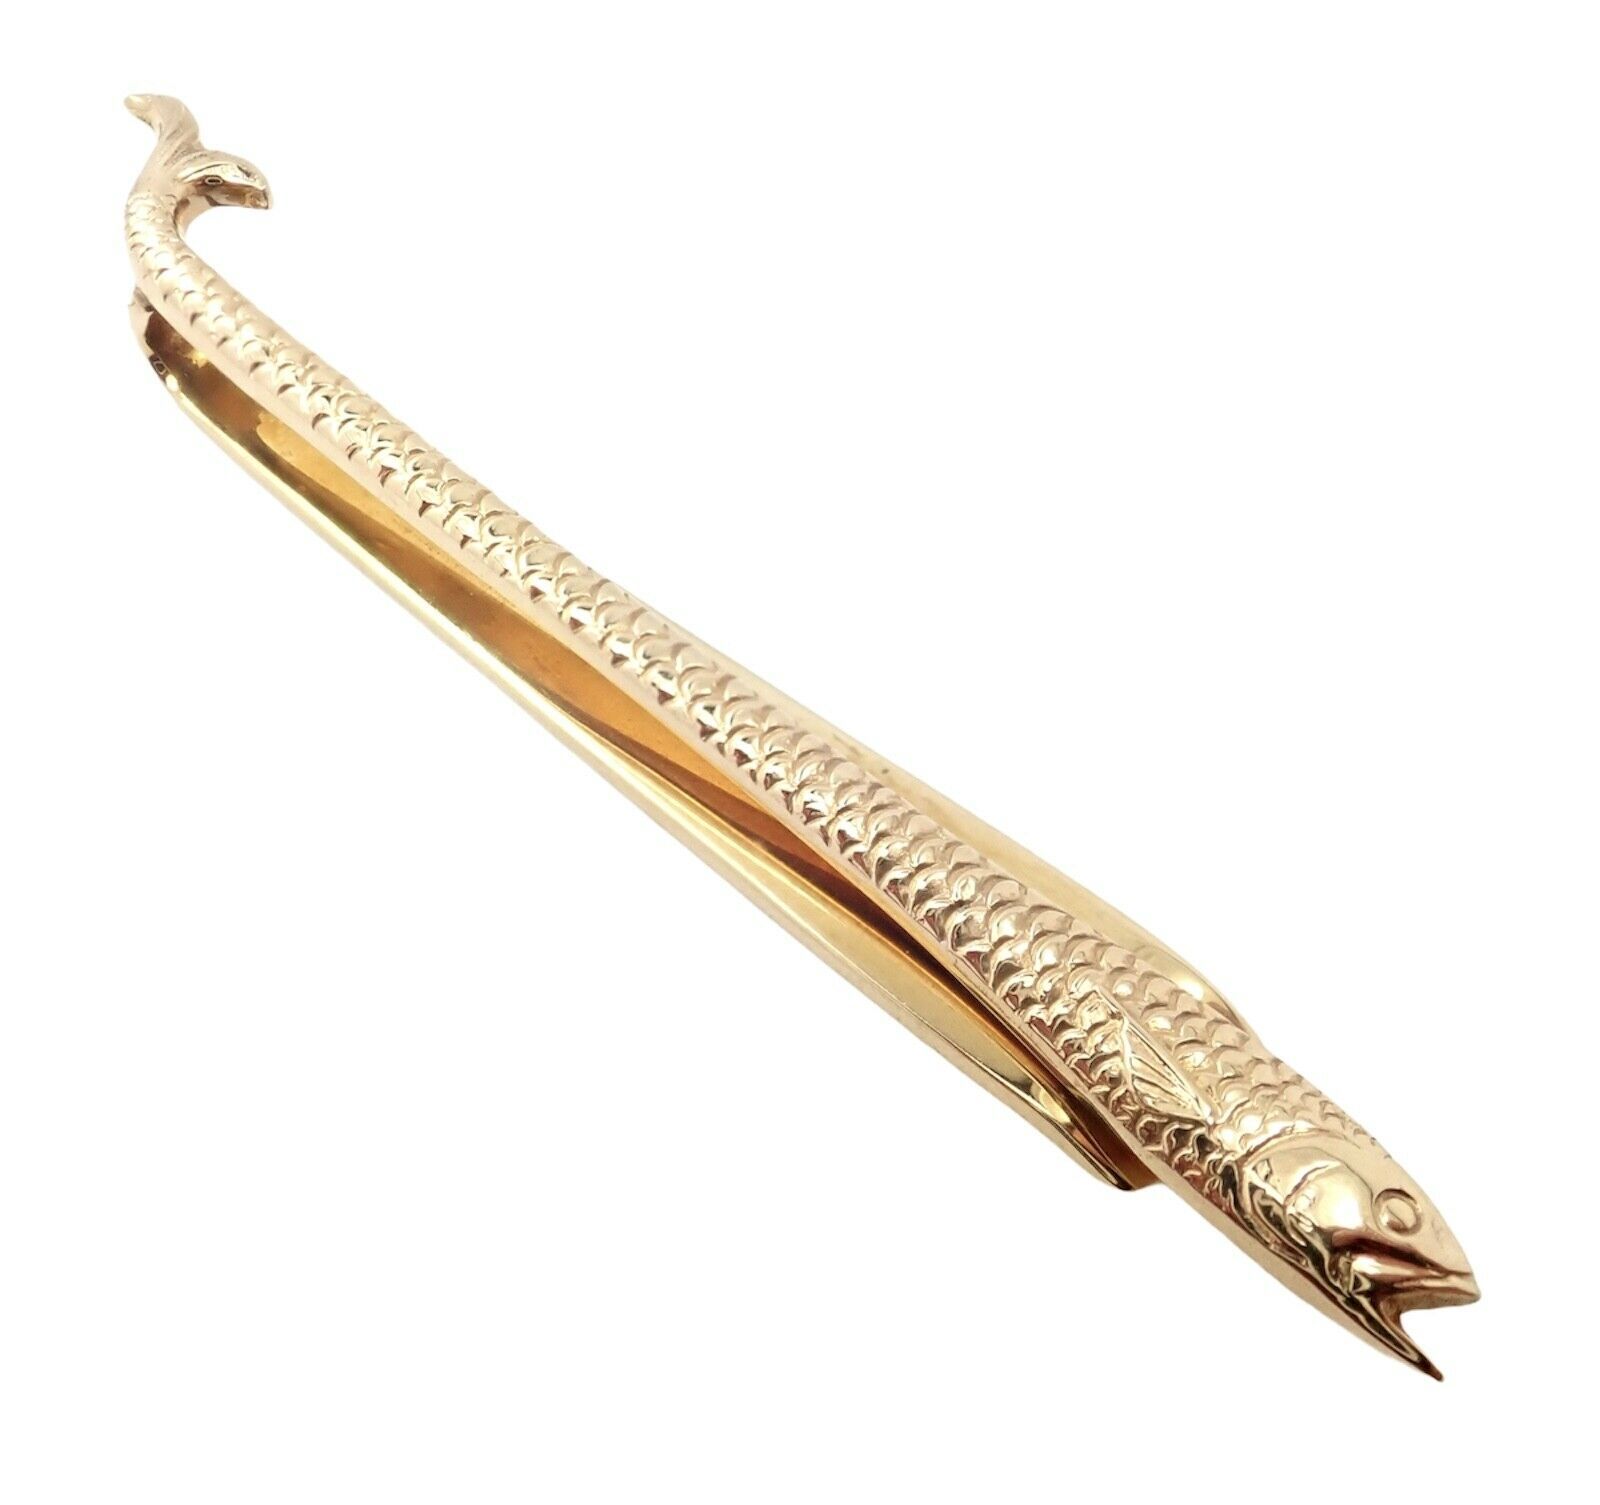 Authentic! Tiffany & Co. 14k Yellow Gold Vintage Fish Fishing Tie Clip - $2,362.50